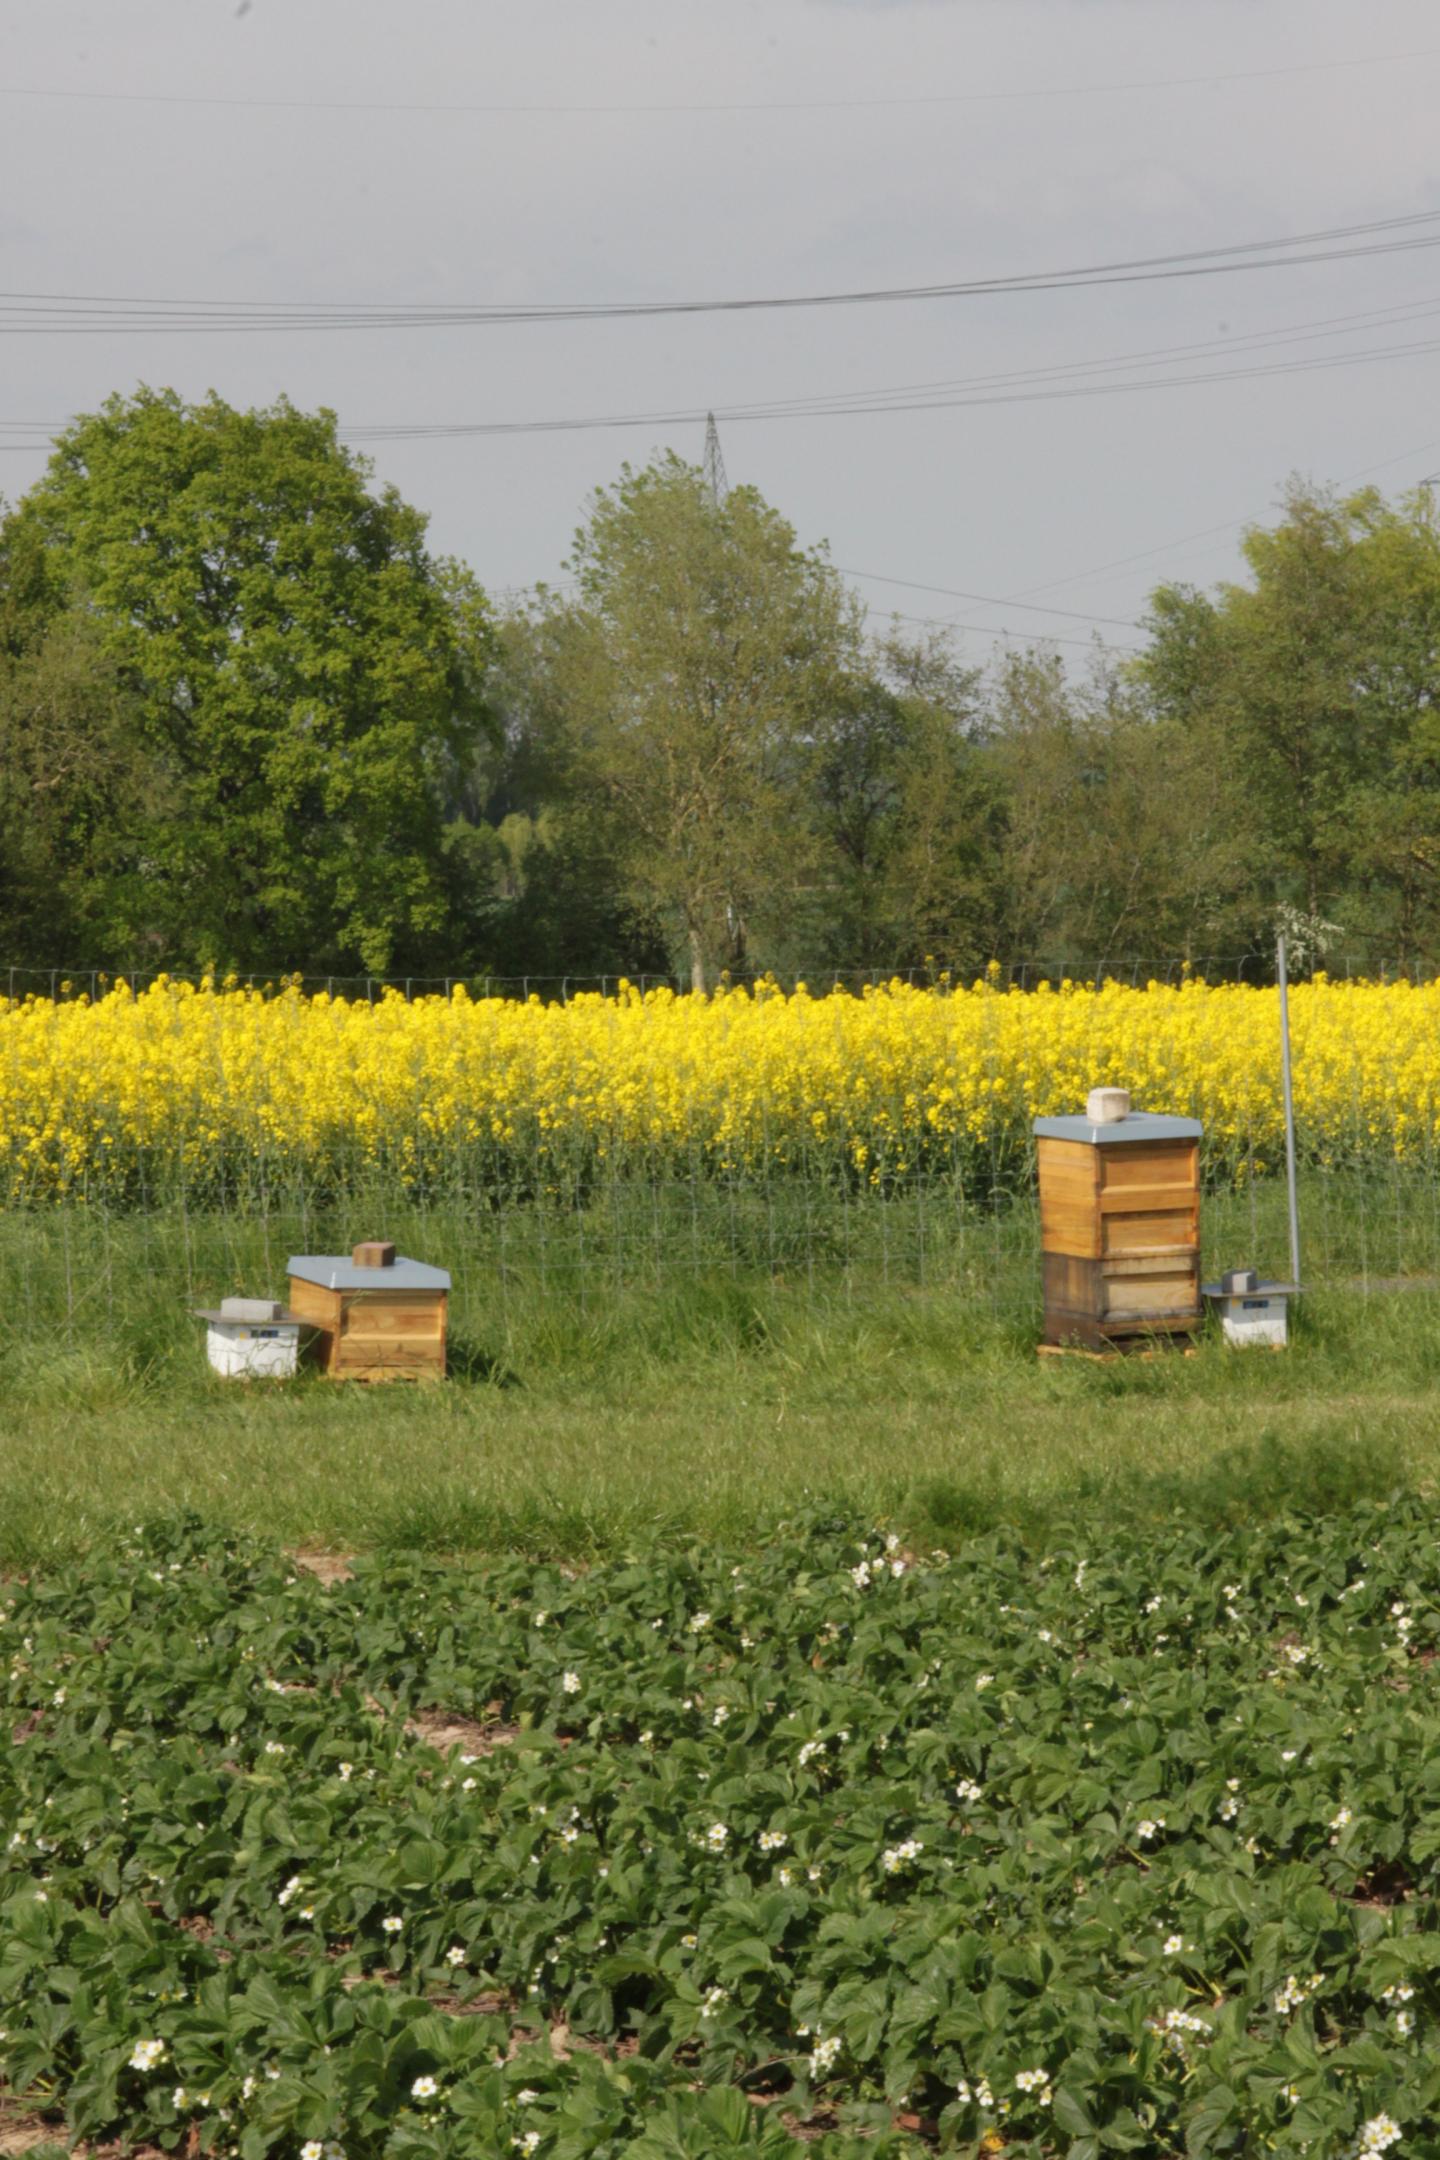 landscape with yellow flowers in background, green fields in foreground and hives in between